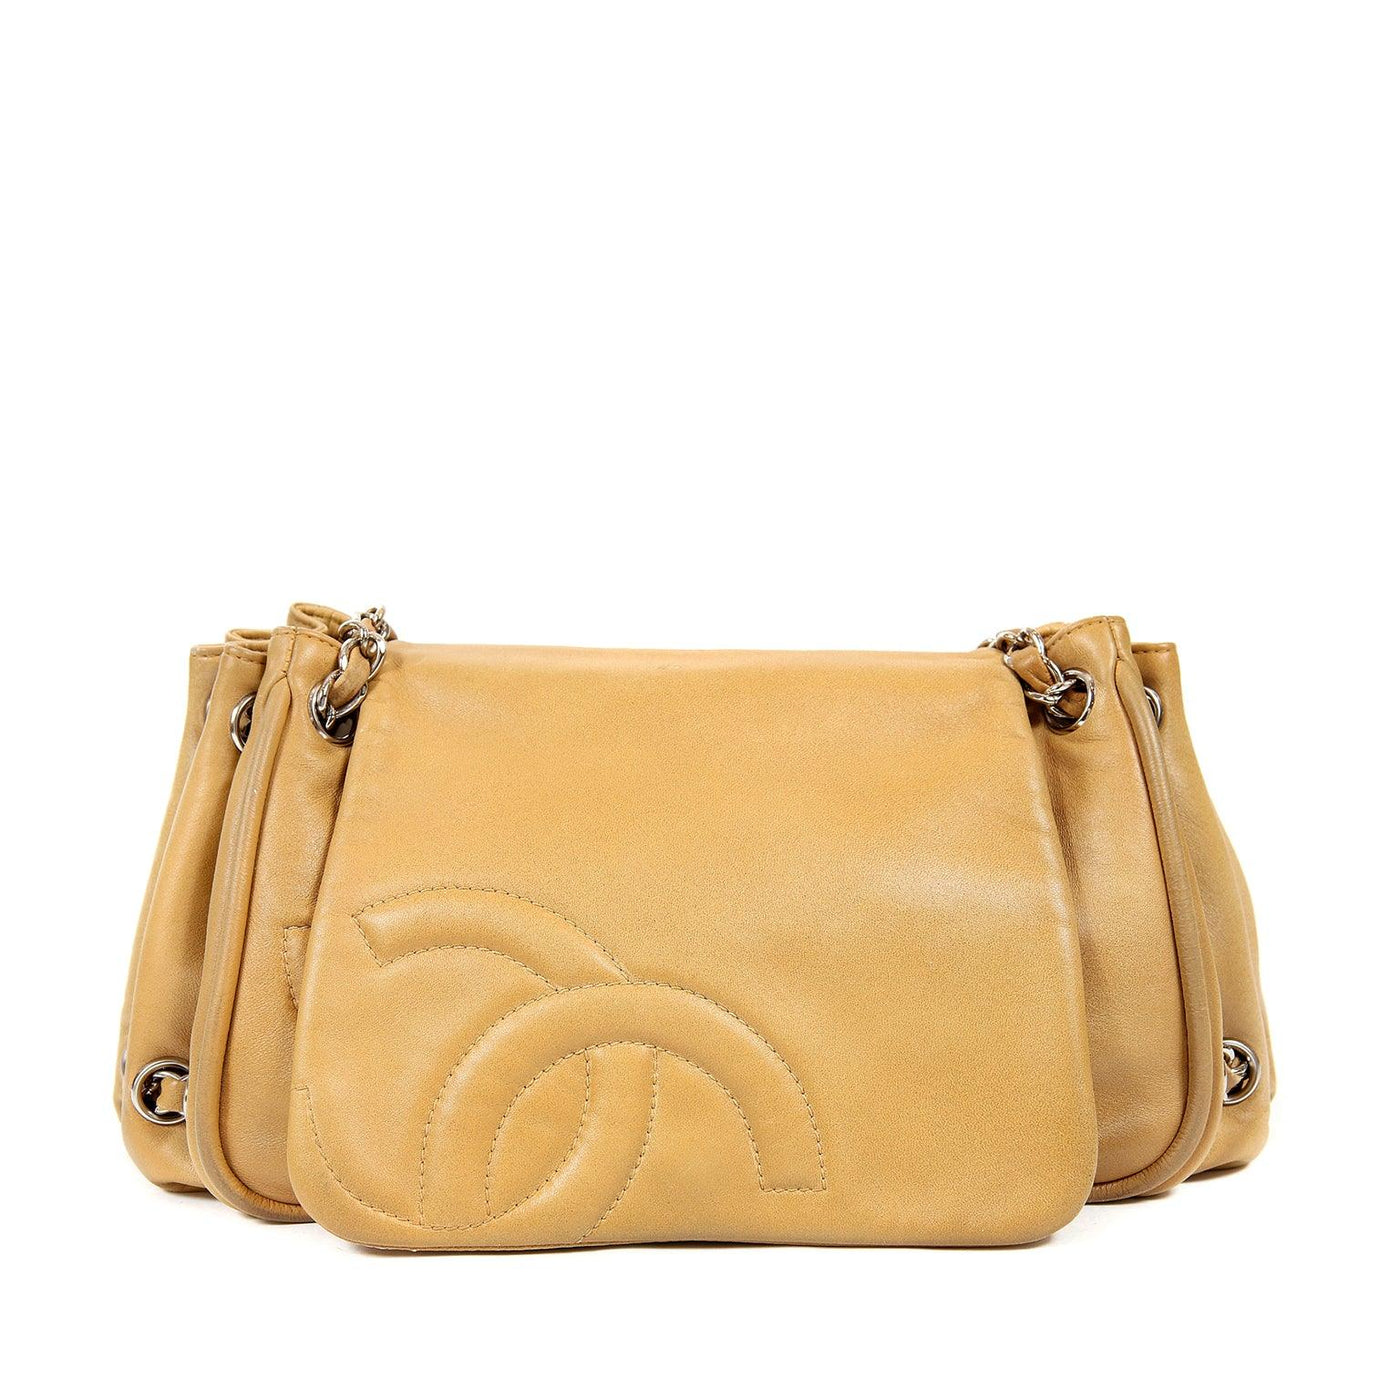 Chanel Beige Leather Accordion Flap Bag – Only Authentics